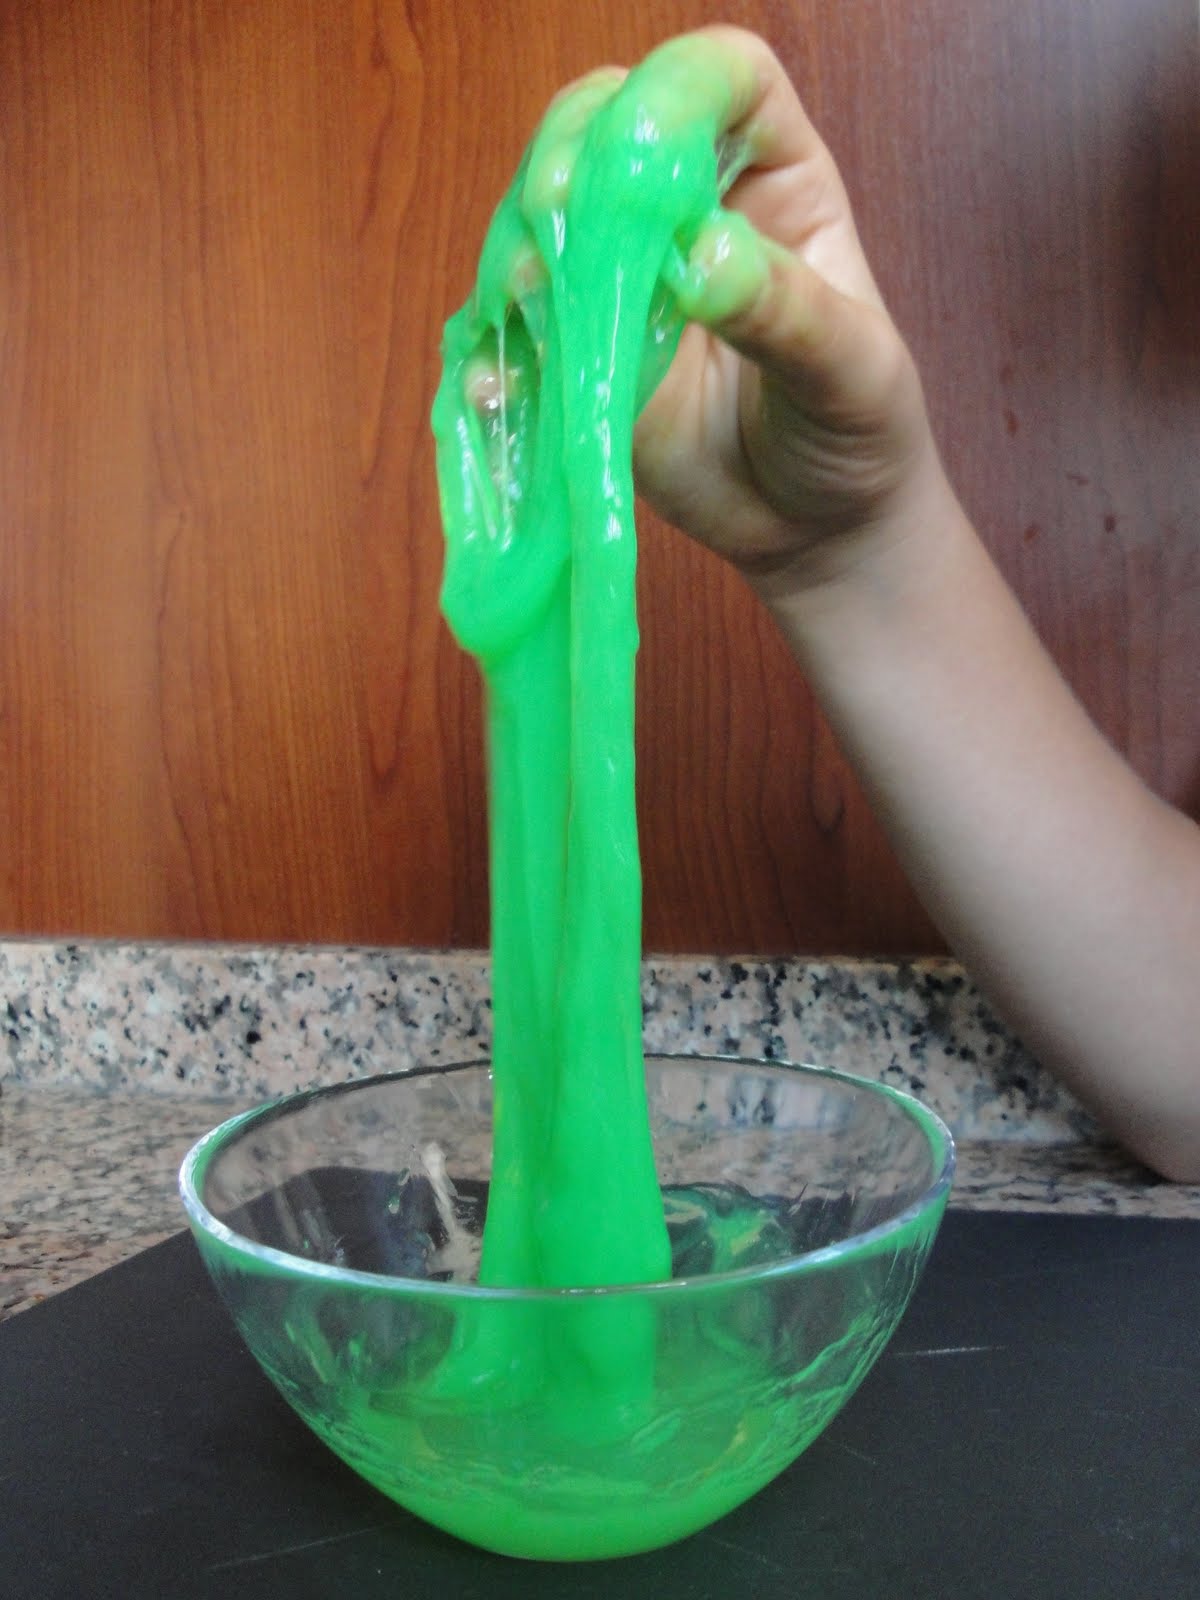 Today I learned Slime  is a mixture of PVA and Borax 